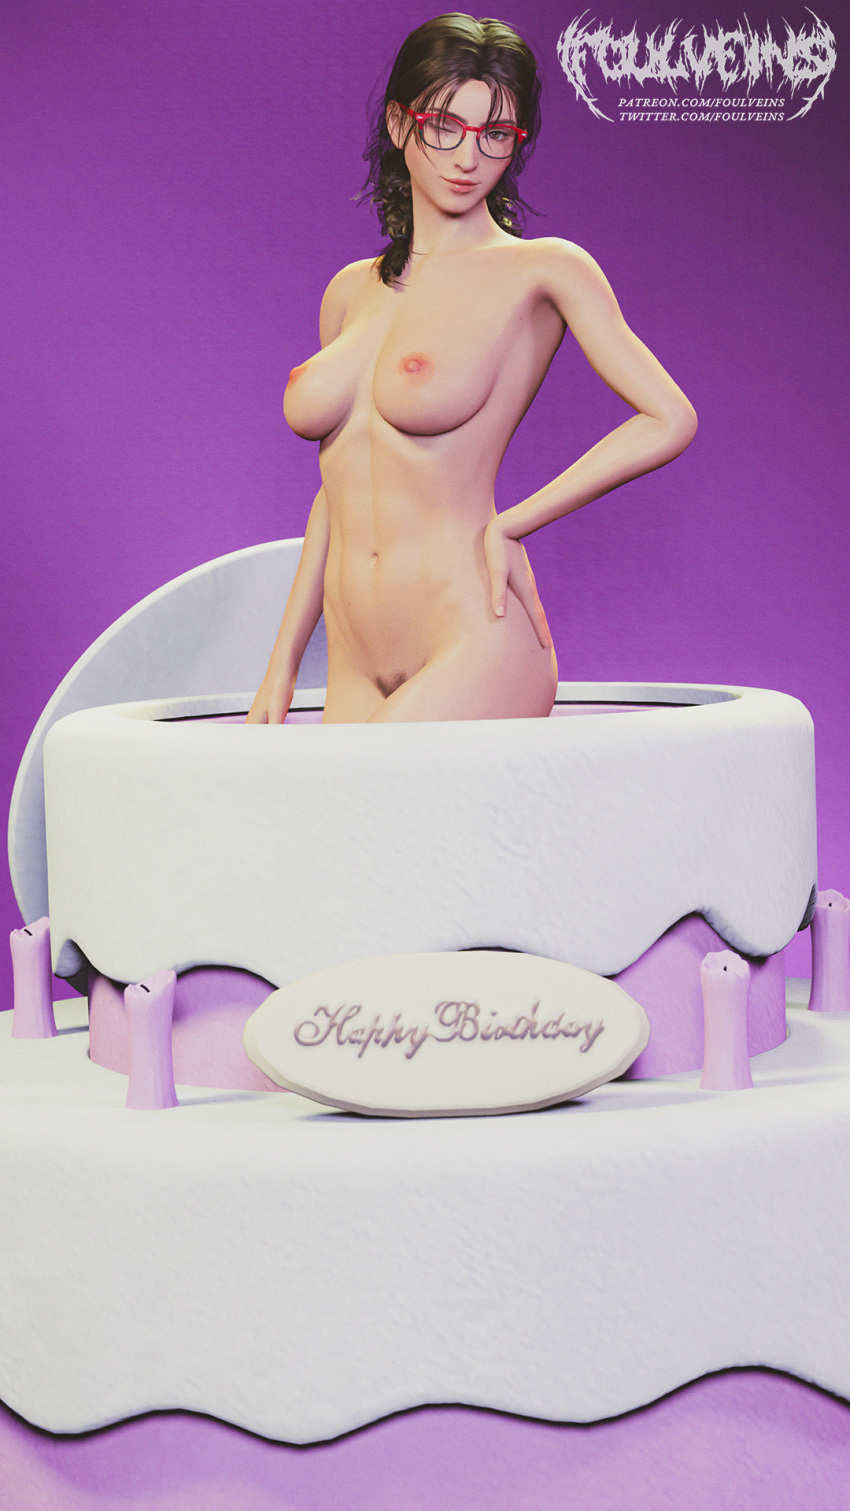 1girl ;) alluring athletic_female bandai_namco beautiful bikini birthday birthday_cake breasts brown_hair brunette celebration clothes_off clothes_removed female_abs female_focus female_human female_only female_pubic_hair fit_female foulveins glasses happy_birthday hips human human_only julia_chang landing_strip naked_female naked_girl naked_woman namco namco_bandai no_bikini no_clothes no_clothing nude nude_female nude_female_solo nude_girl nude_woman pubic_hair sexy solo_female solo_focus solo_human tekken tekken_3 tekken_4 tekken_5 tekken_5_dark_resurrection tekken_6 tekken_7 tekken_8 tekken_bloodline tekken_tag_tournament tekken_tag_tournament_2 thick_thighs thighs twitter undressed wink